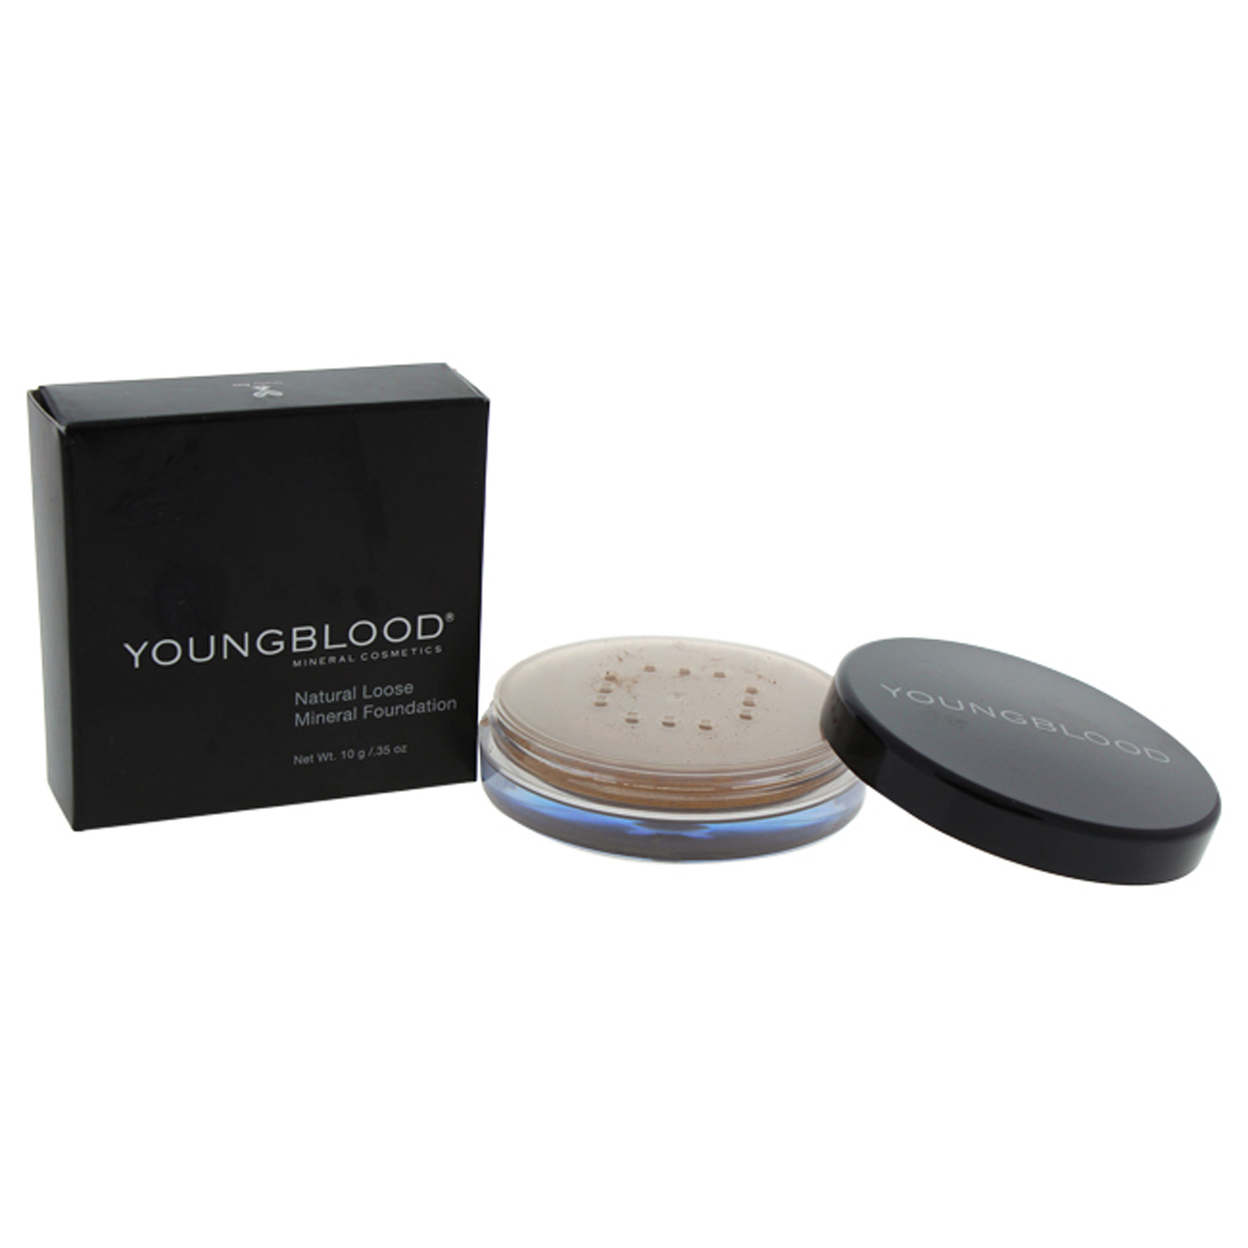 Youngblood Women COSMETIC Natural Loose Mineral Foundation - Coffee 0.35 Oz